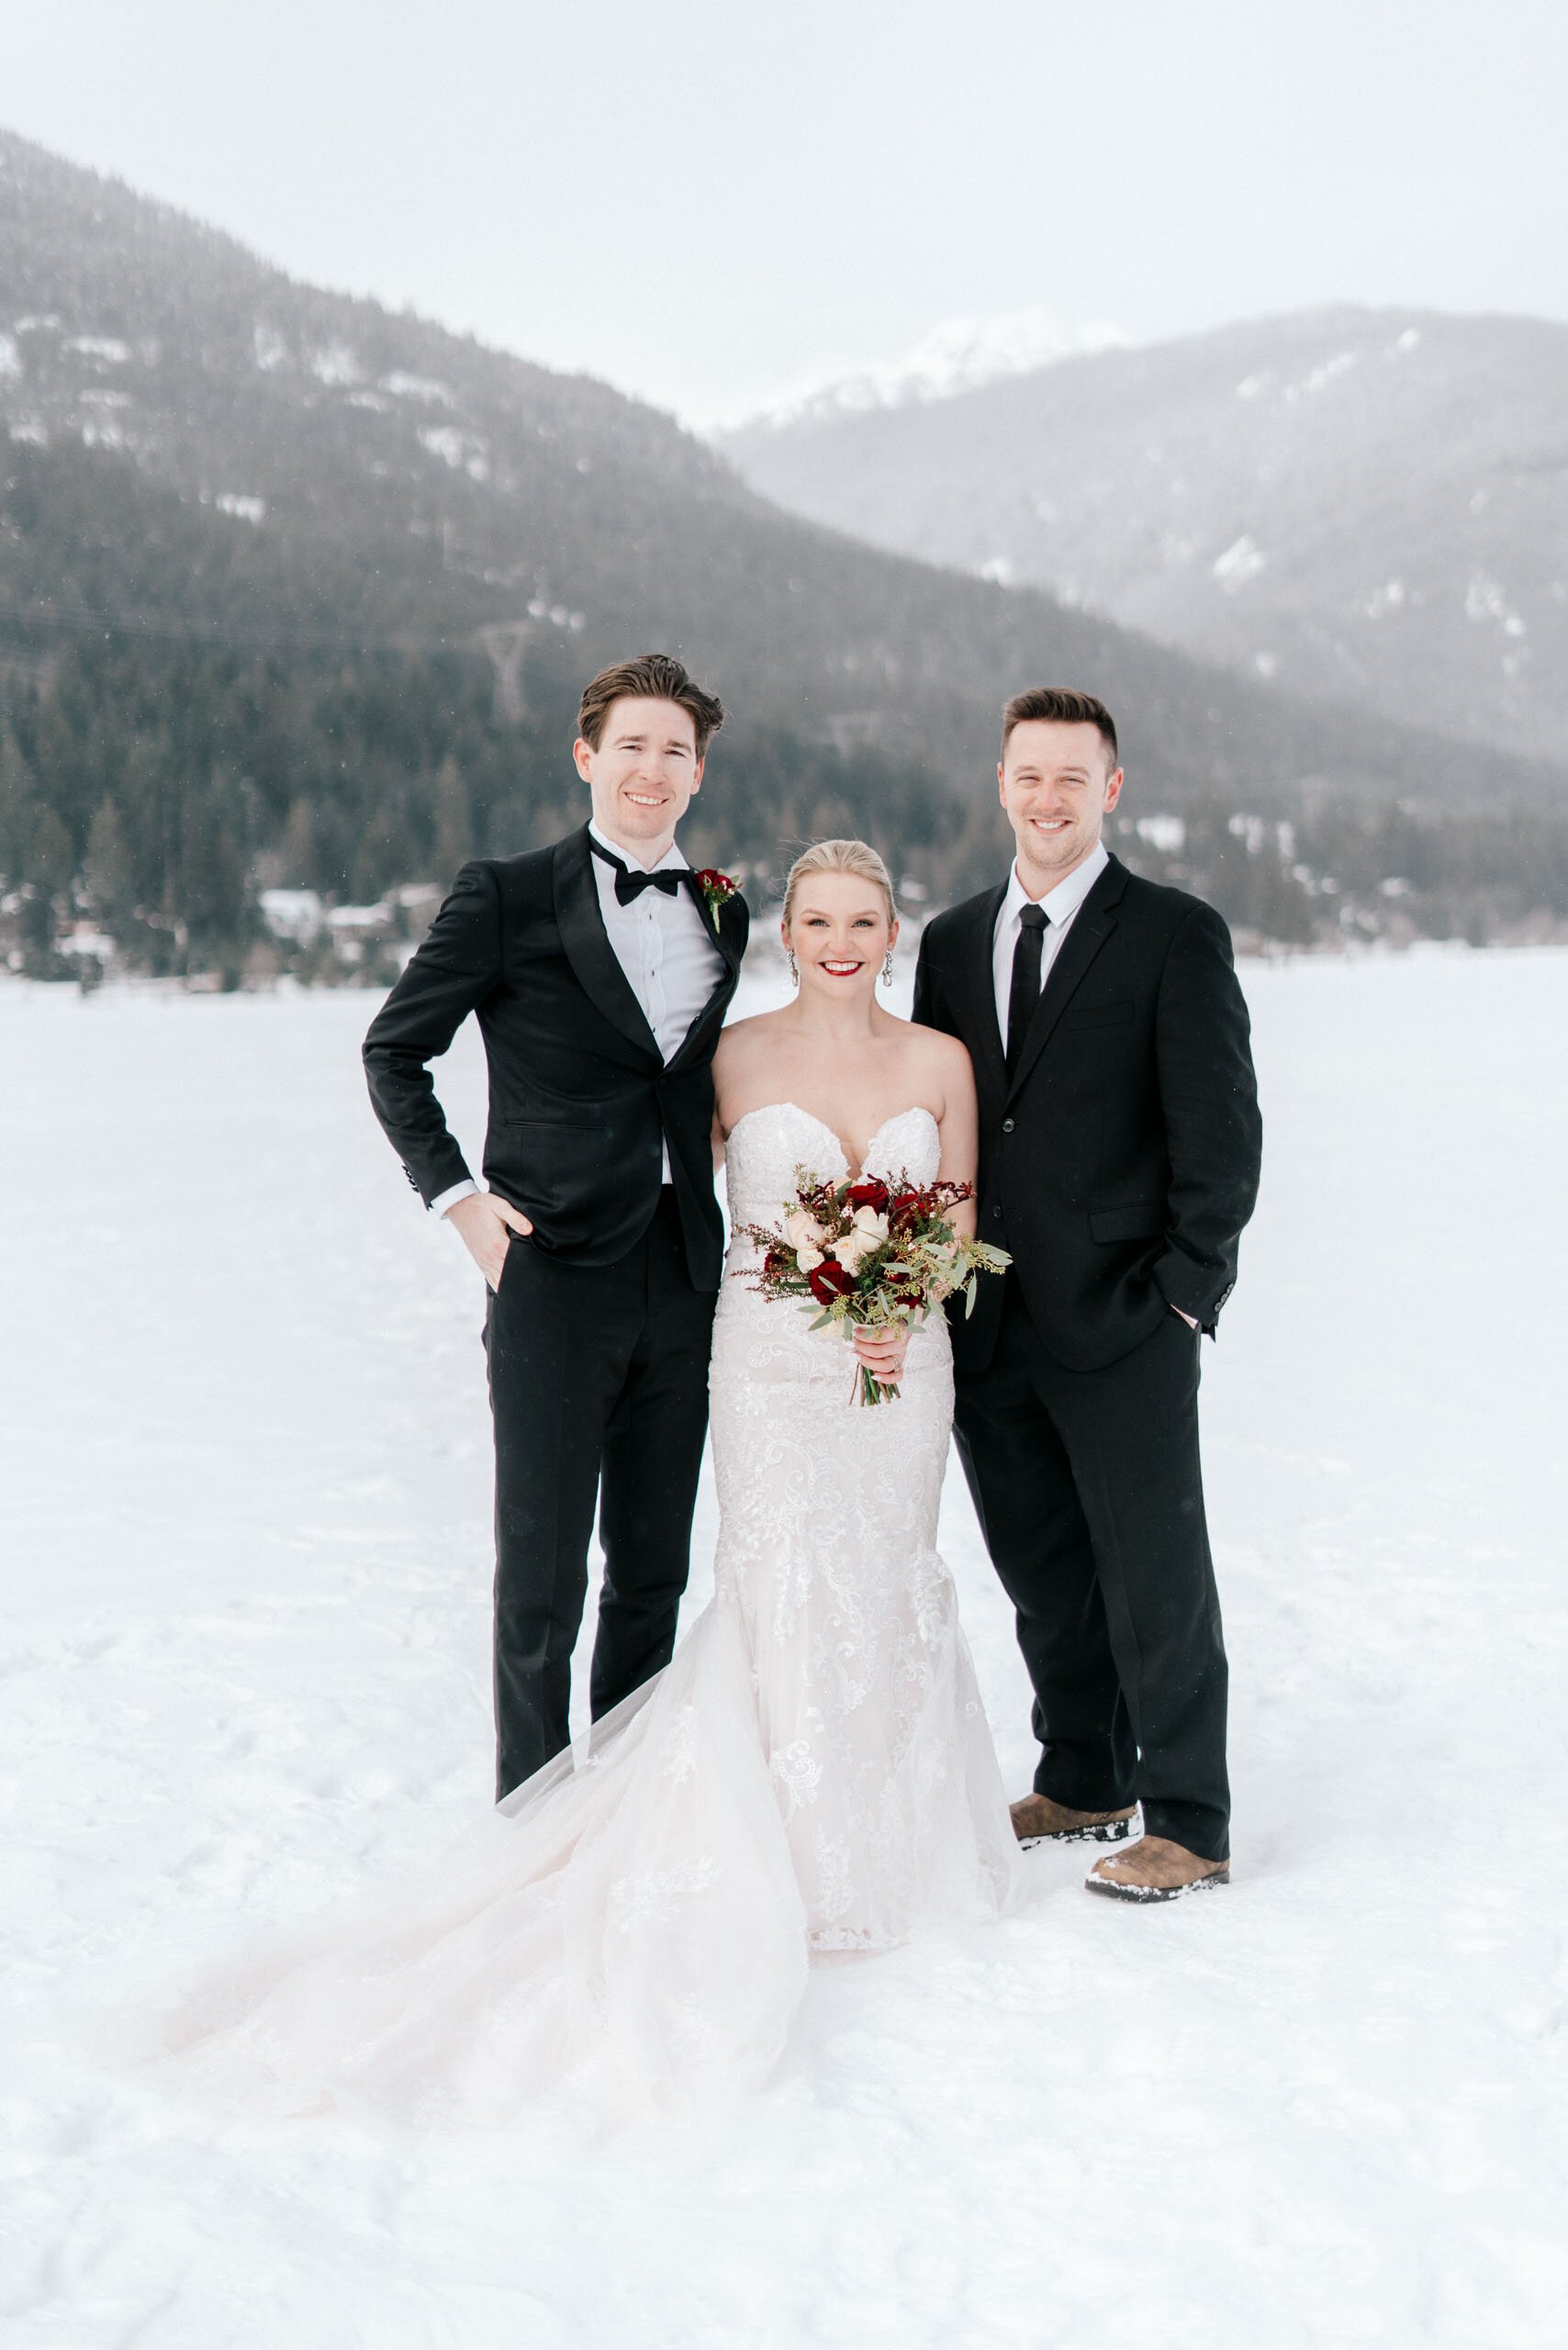 A groomsman smiles as he poses next to a bride and groom in the snowy mountains of Whistler, BC.